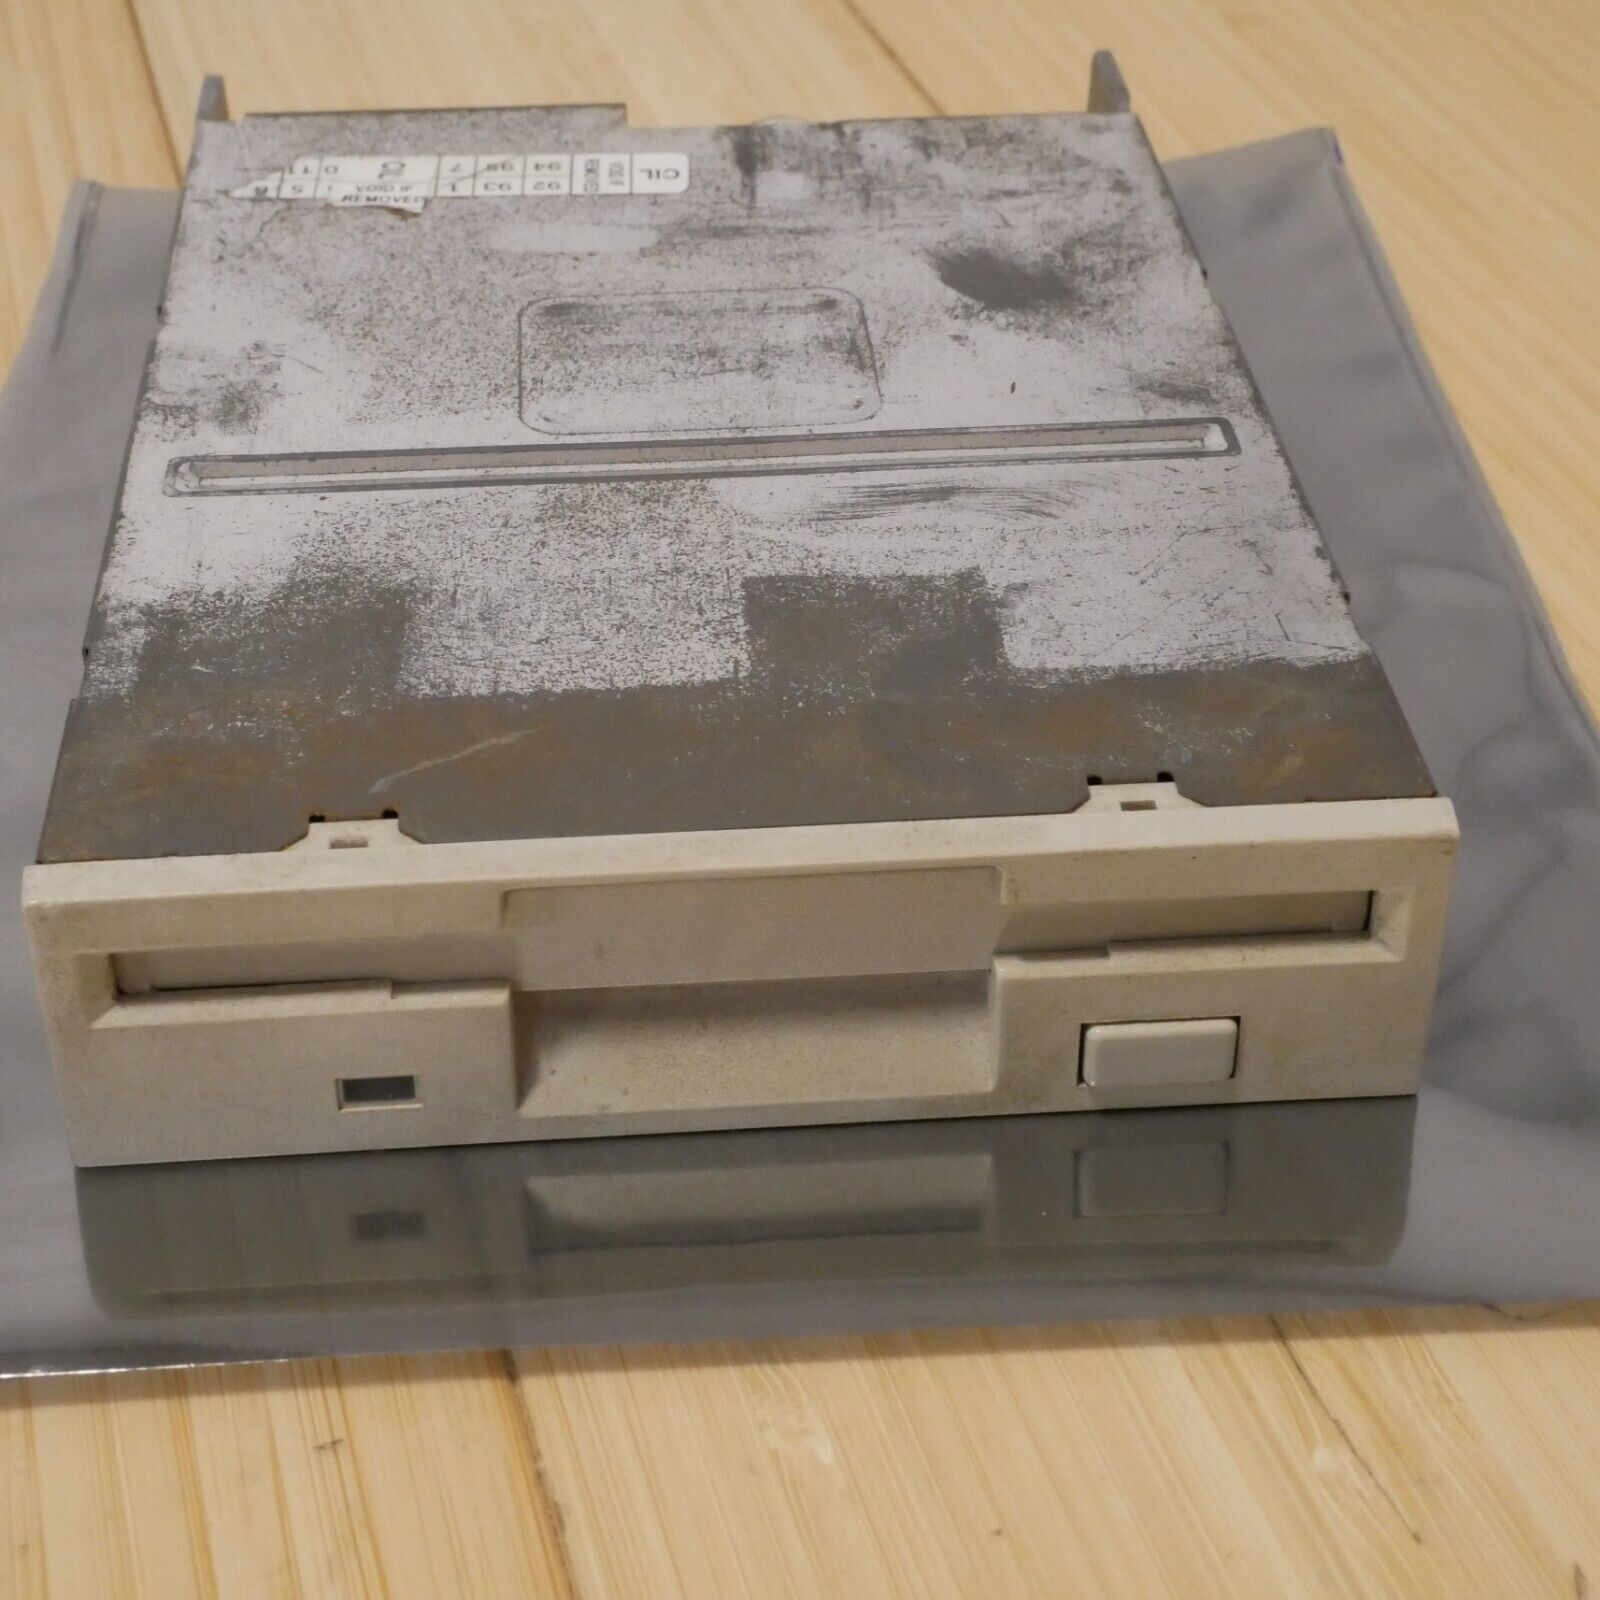 Primary image for TEAC 3.5 inch Internal Floppy Disk Drive Model FD-235HF Tested & Working - 22